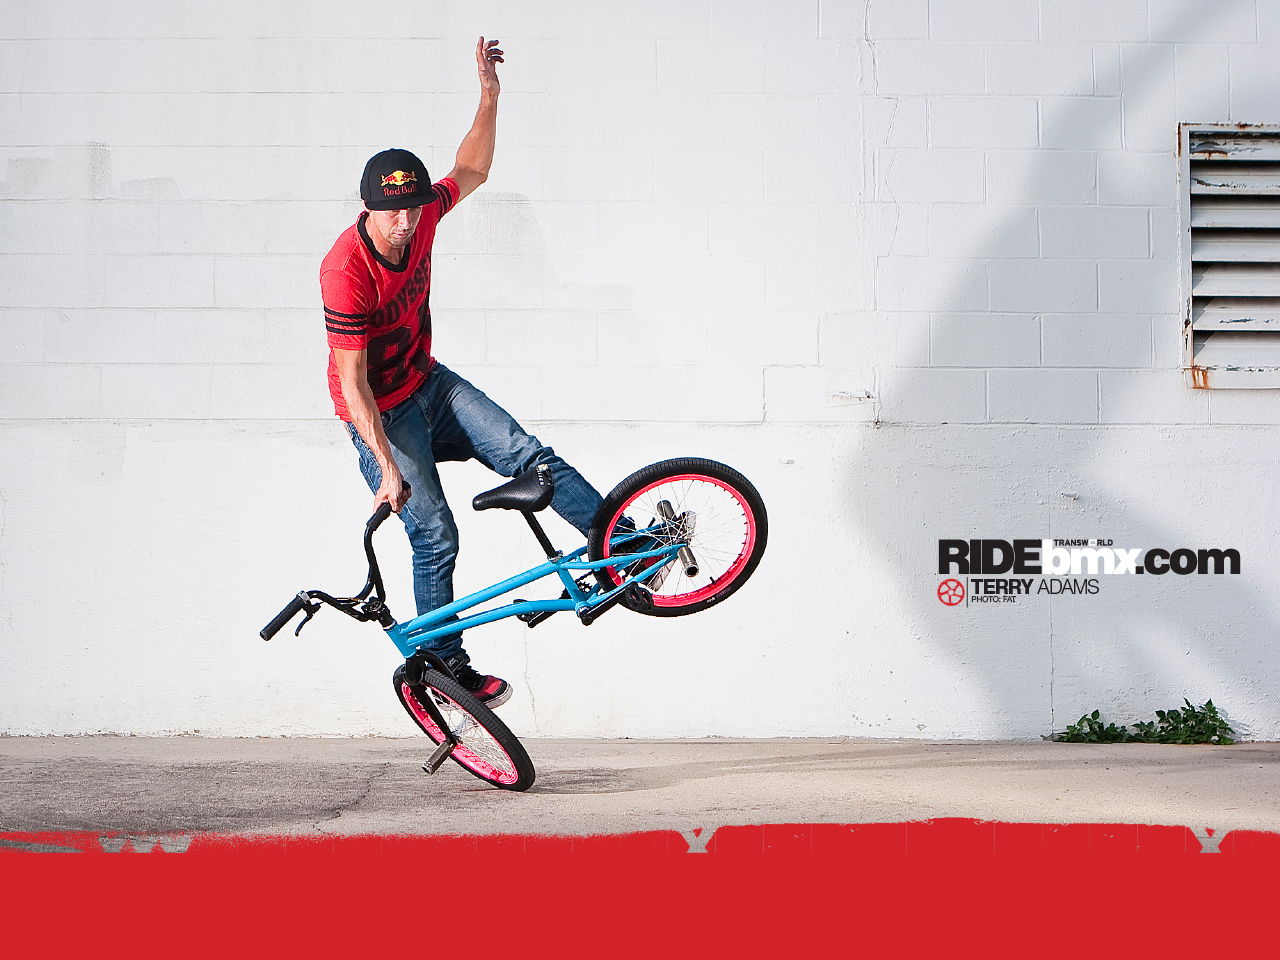 Ride Bmx Put Up A Handful Of New Wallpaper S This Week And